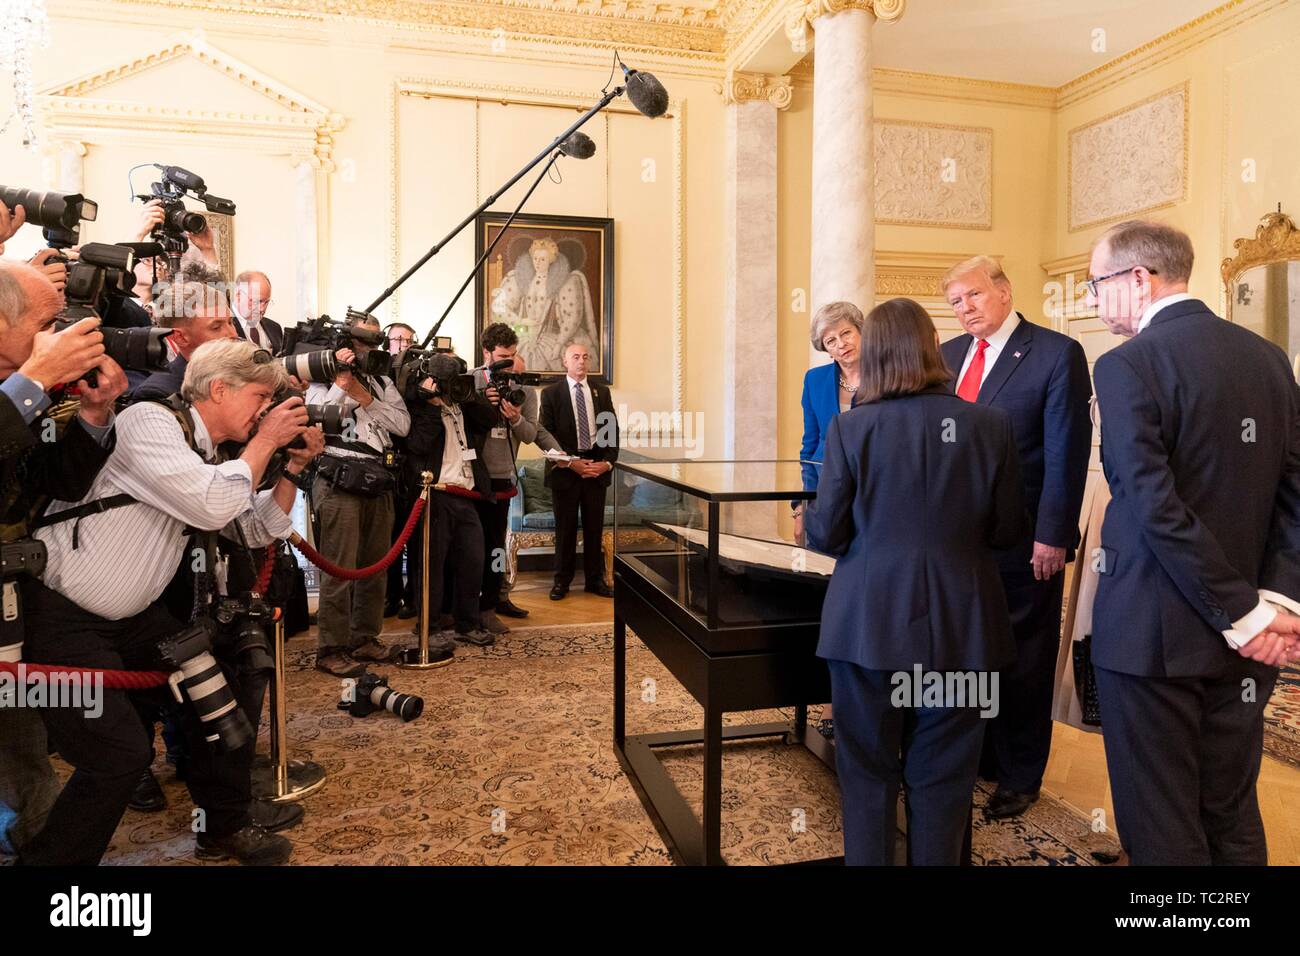 London, UK. 04th June, 2019. U.S President Donald Trump outgoing British Prime Minister Theresa May and her husband Philip May, right, view an original copy of the U.S. Declaration of Independence during a tour of historic documents at #10 Downing Street June 4, 2019 in London, England. The handwritten parchment copy of the U.S. Declaration of Independence, known as the Sussex Declaration, is one of only two known to exist. Credit: Planetpix/Alamy Live News Stock Photo